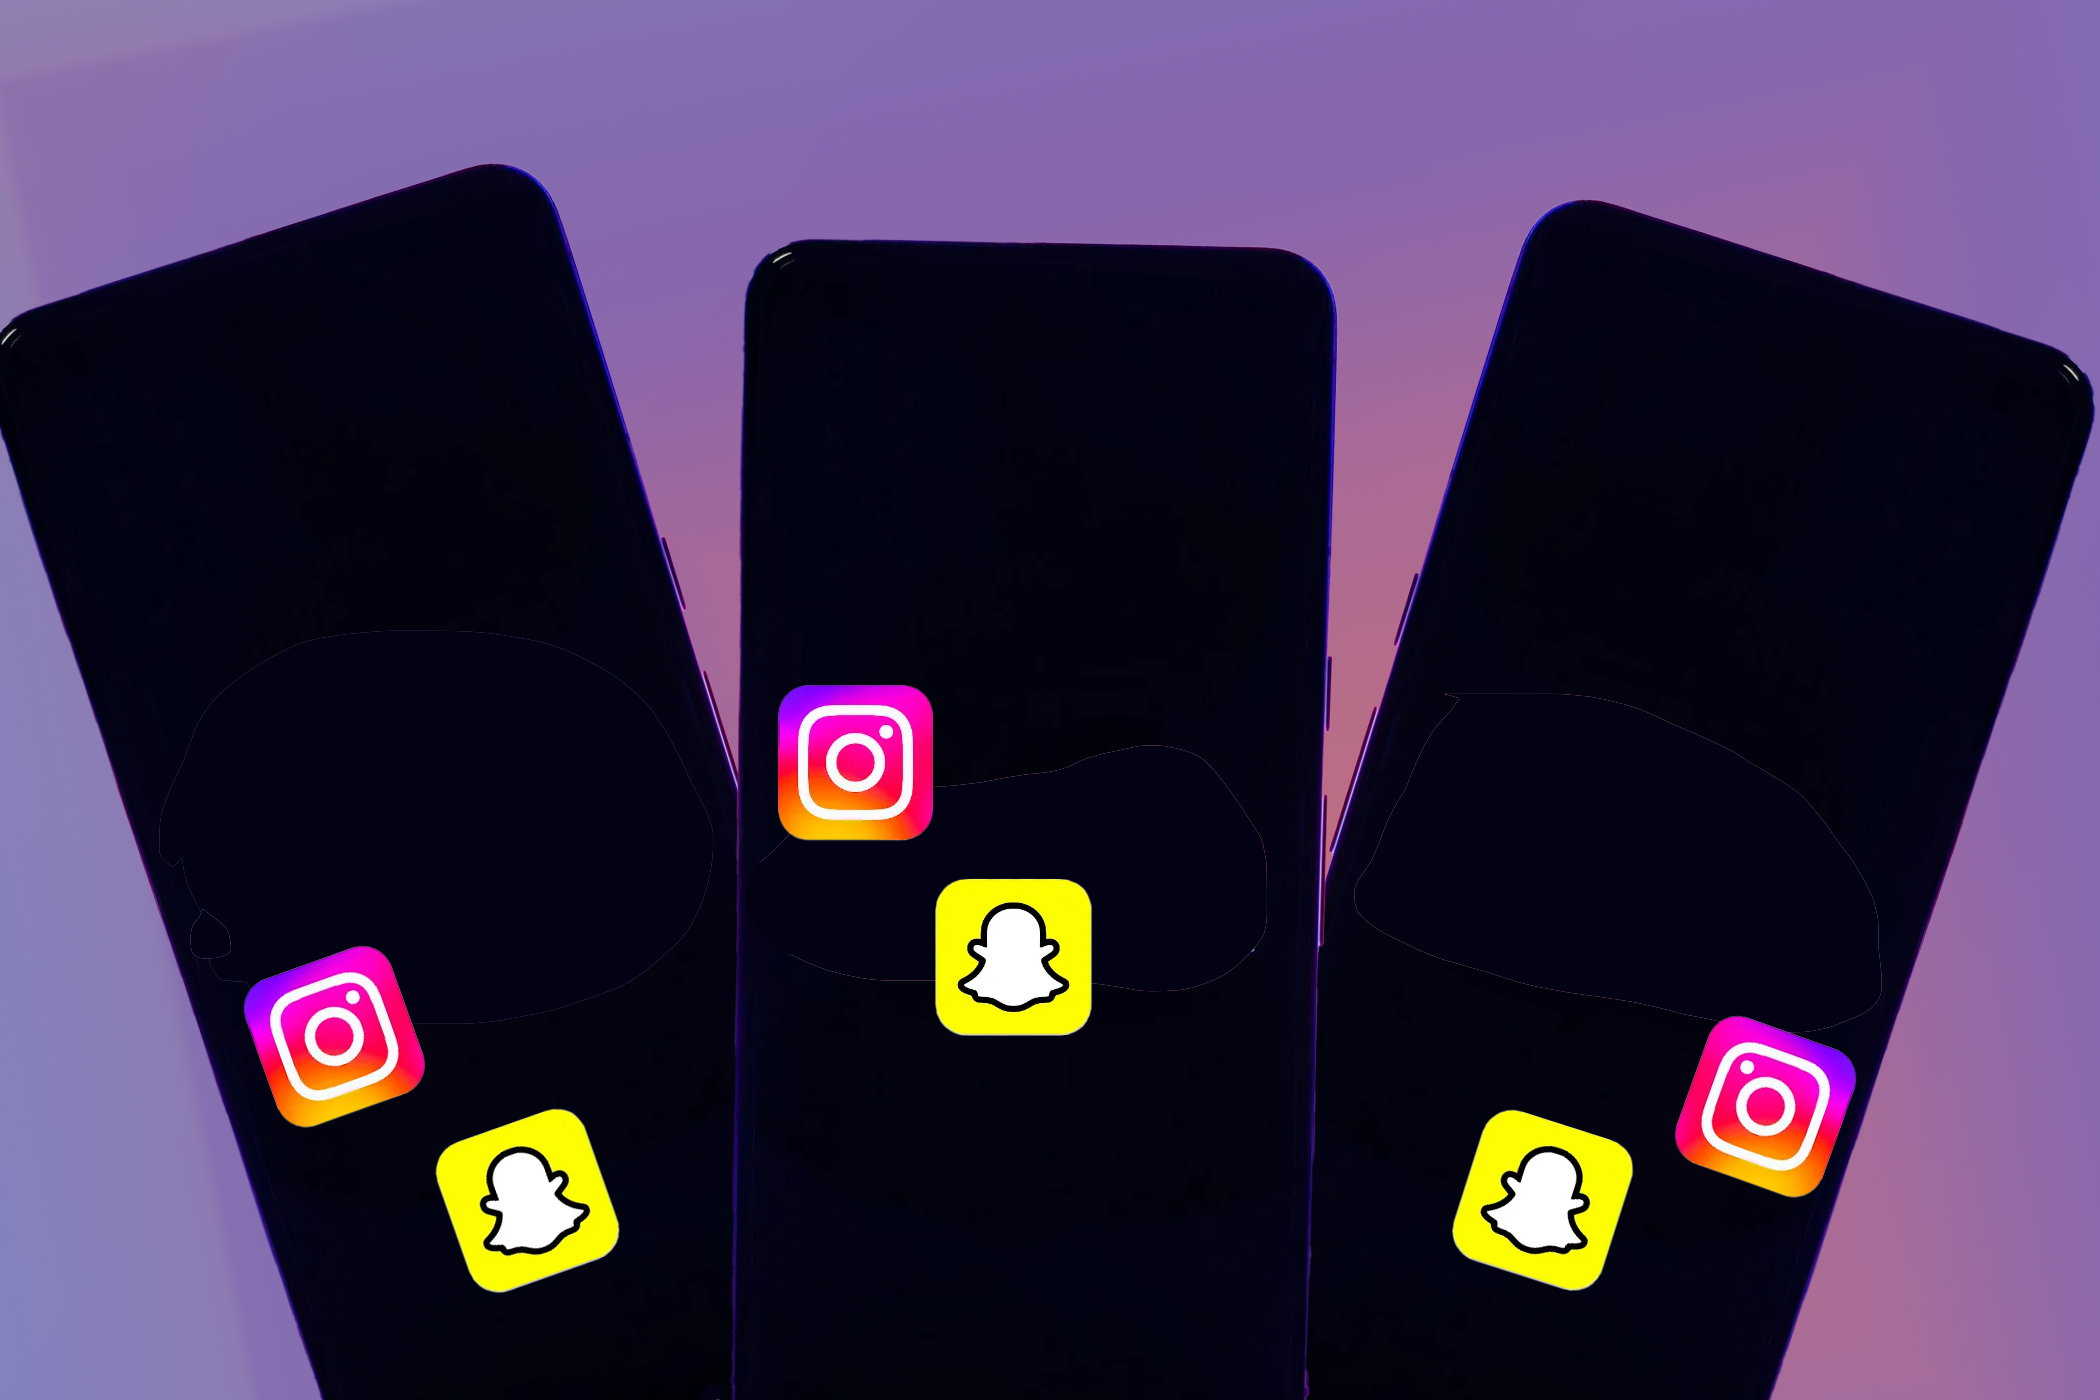 An illustration of three phones with the same homescreen against a purple background.